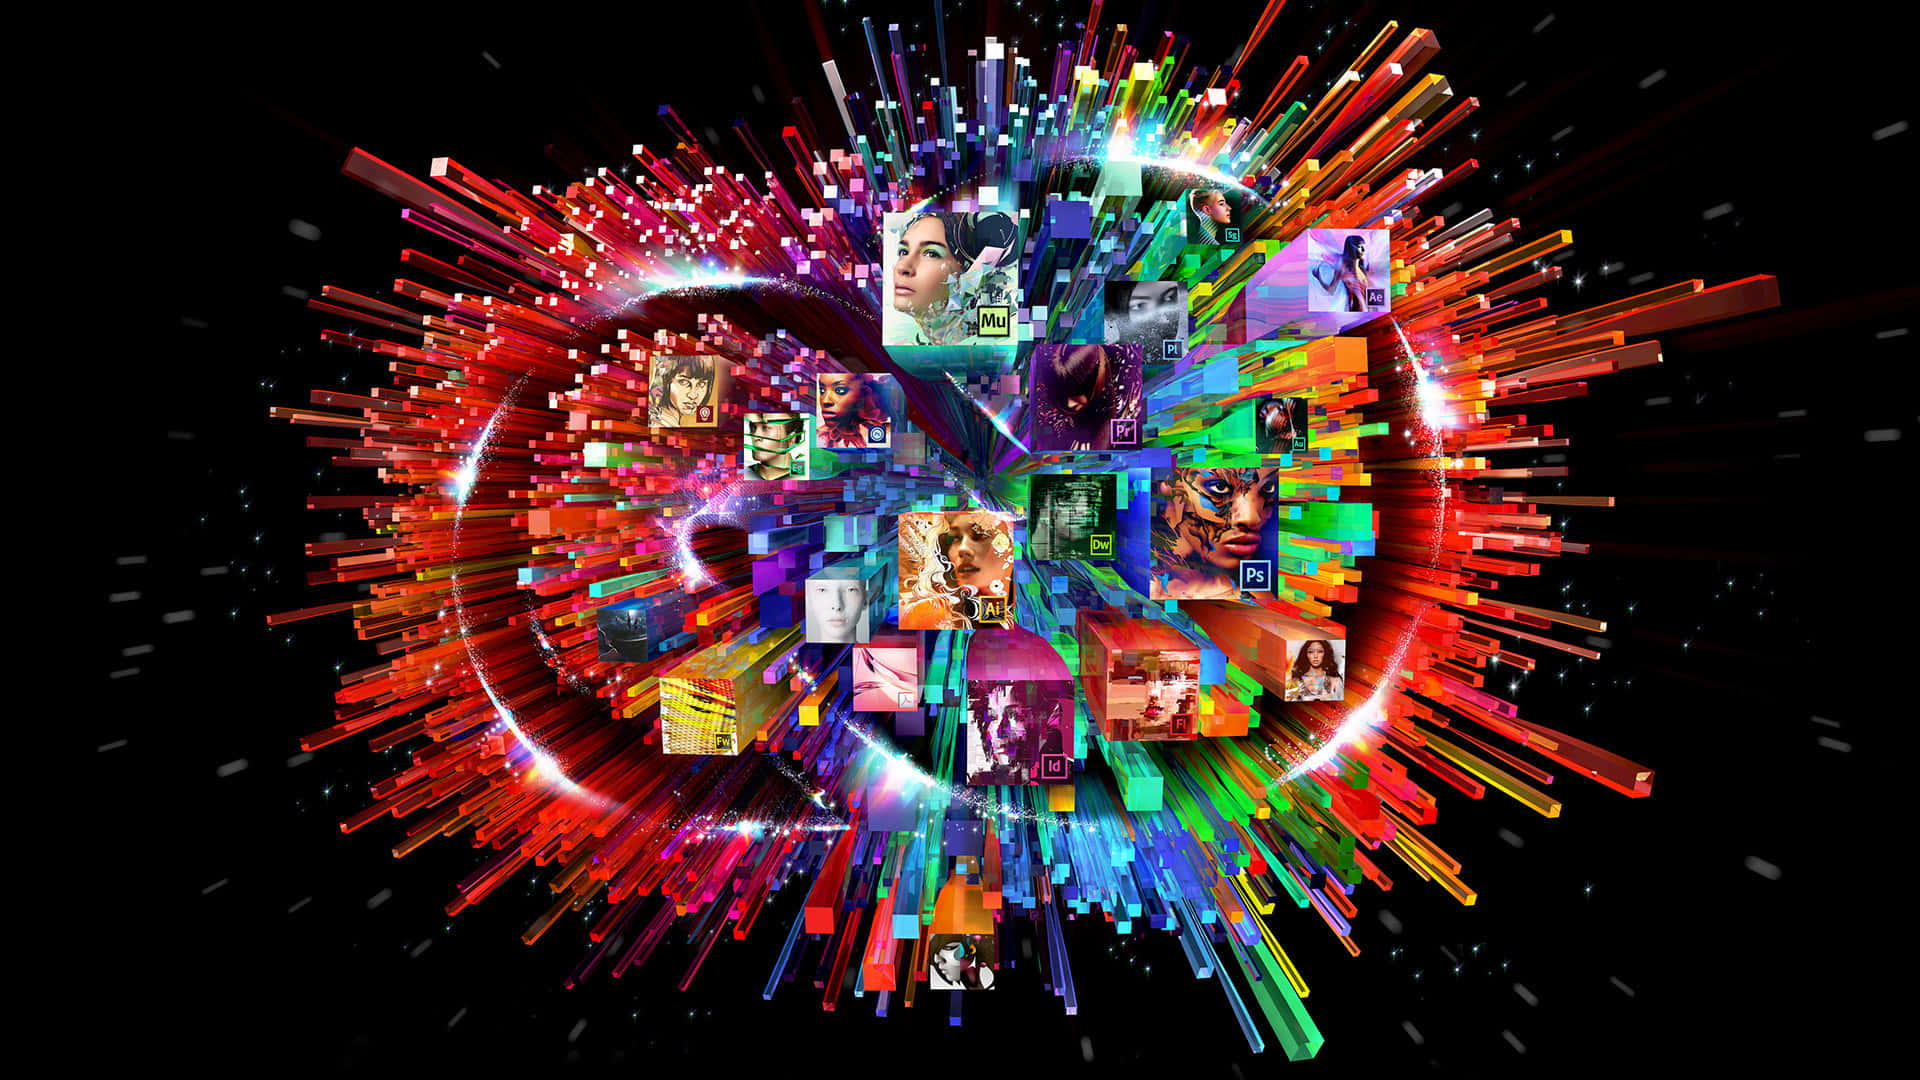 A Colorful Image Of Adobe Cs6